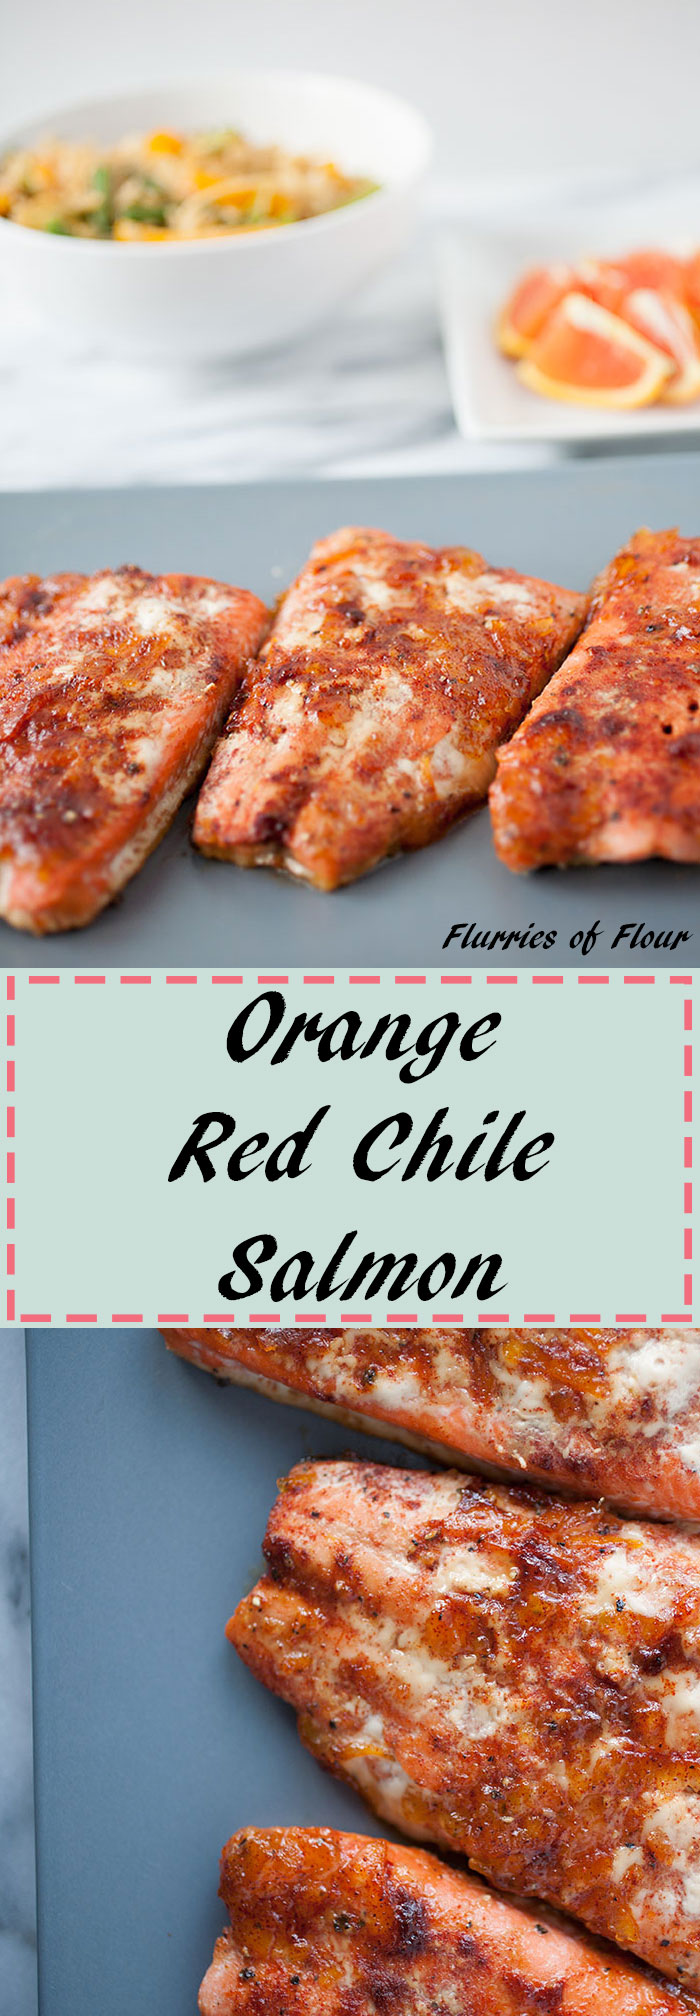 The orange and red chile in this orange red chile salmon adds a beautiful flavor and a spicy bite for a healthy and delicious for the New Year. 